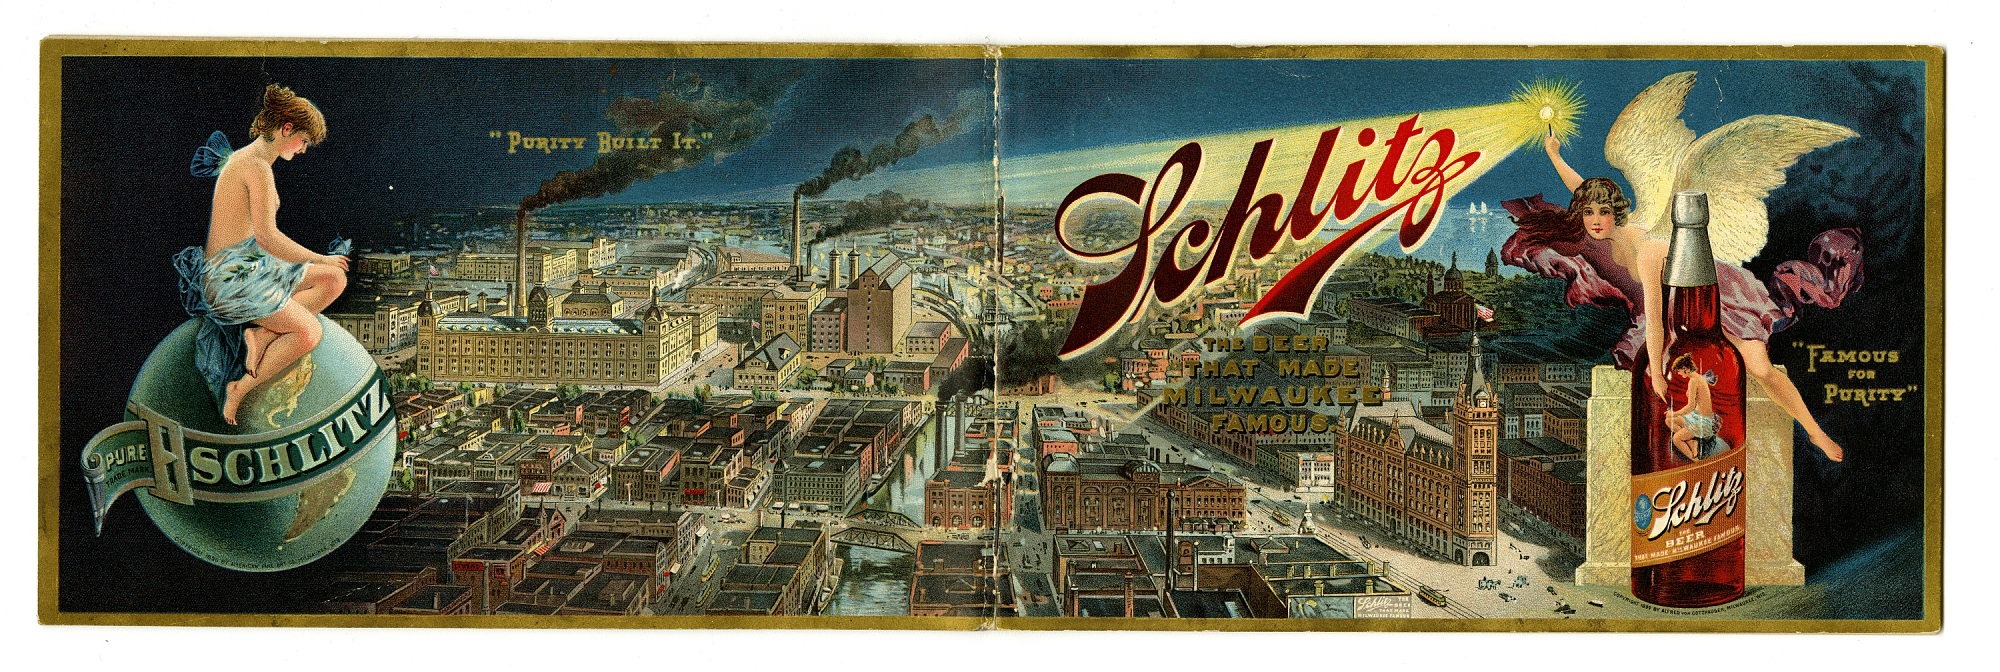 Schlitz beer ad, circa 1899. (Courtesy of National Museum of American History: Smithsonian Institution)